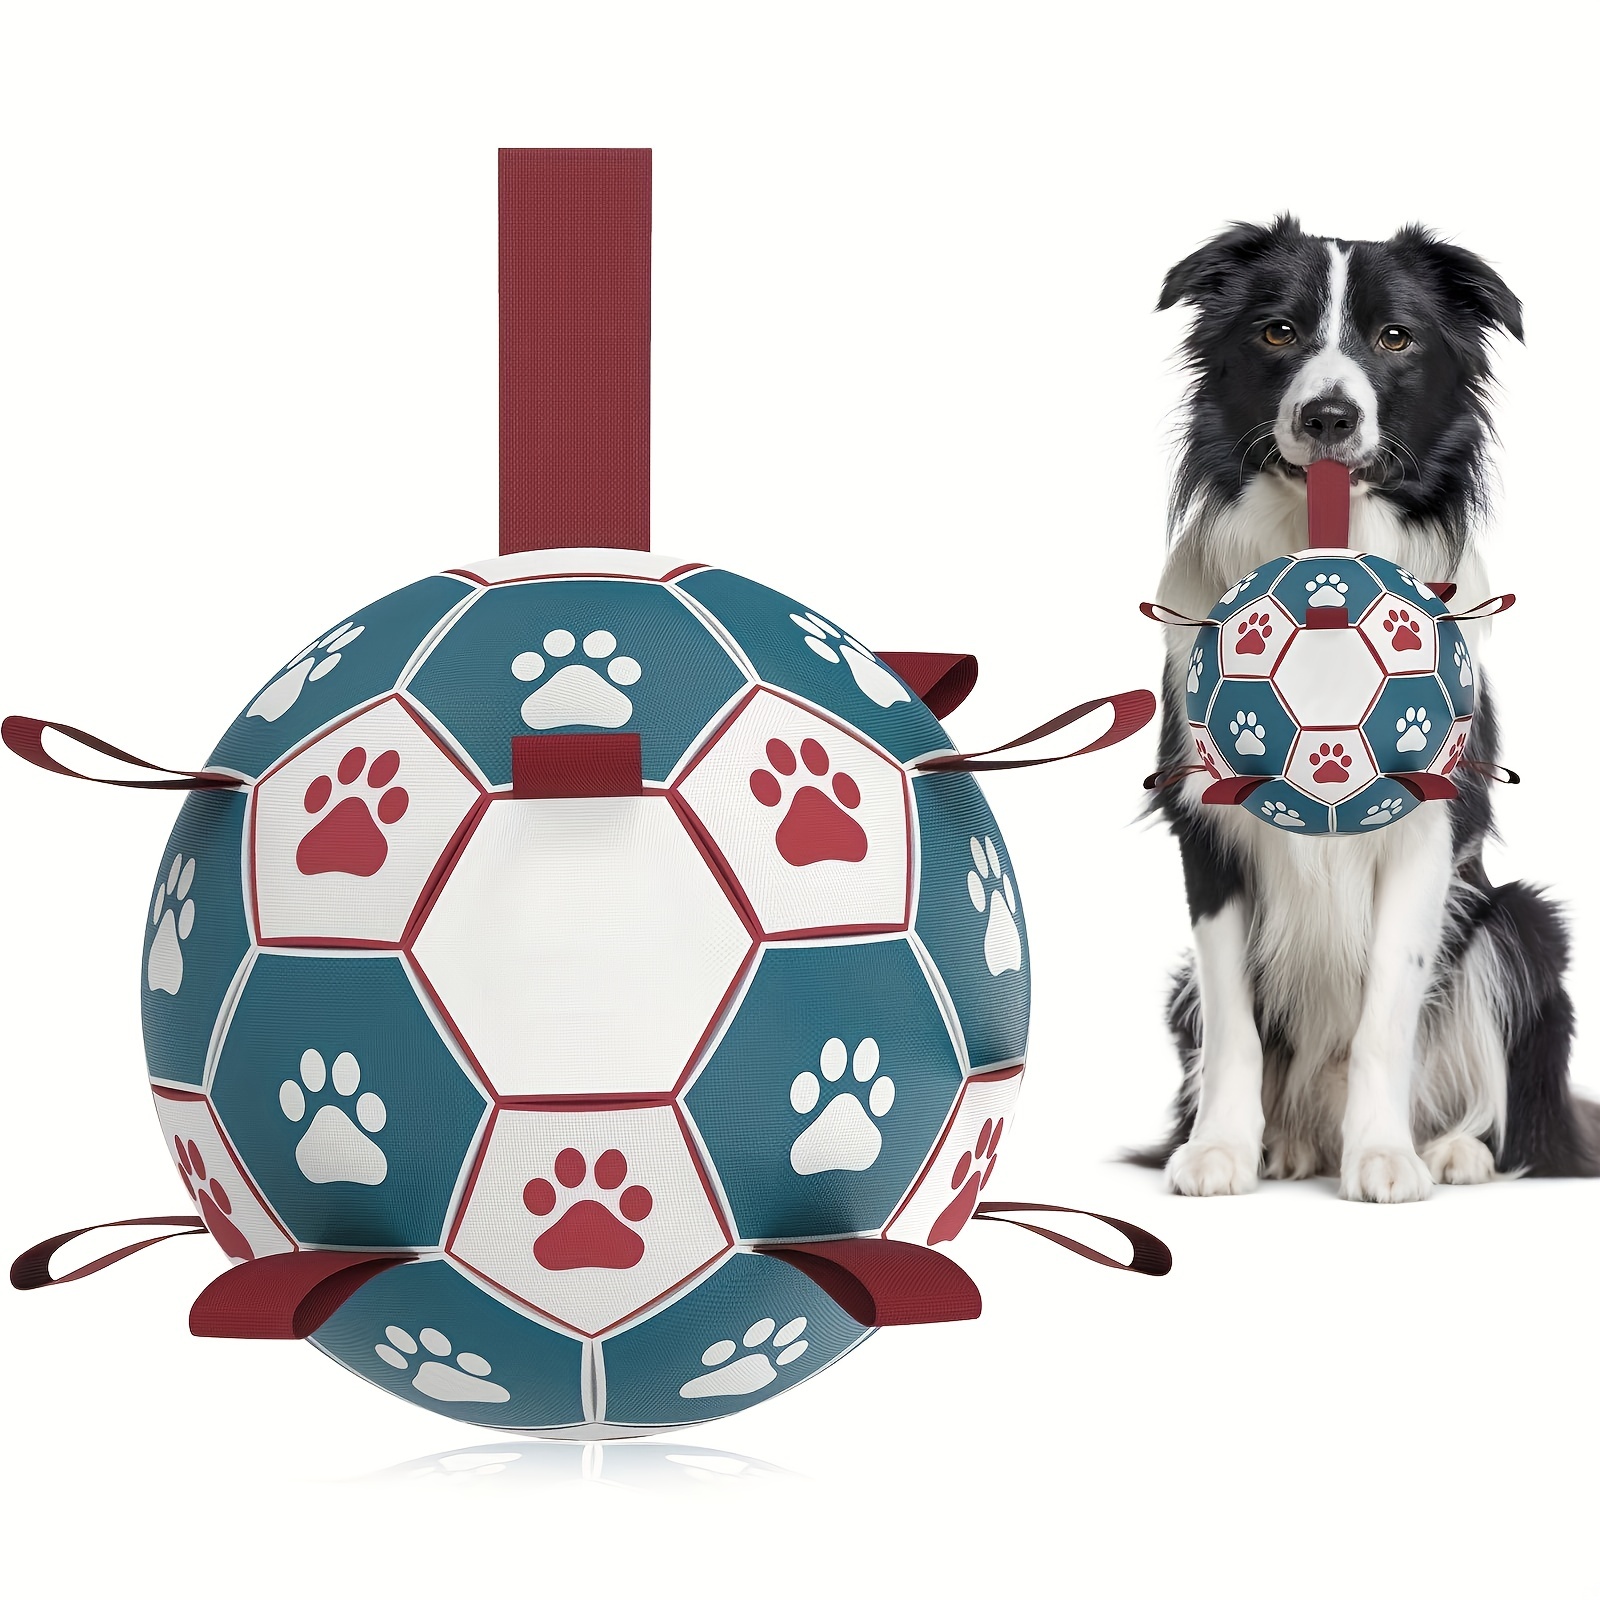 

Color Block Dog Toy Soccer Ball With Nylon Straps, Interactive Tough Rubber Dog Toy For Tug Of War, Durable Dog Toy Ball For Small Medium And Large Dogs